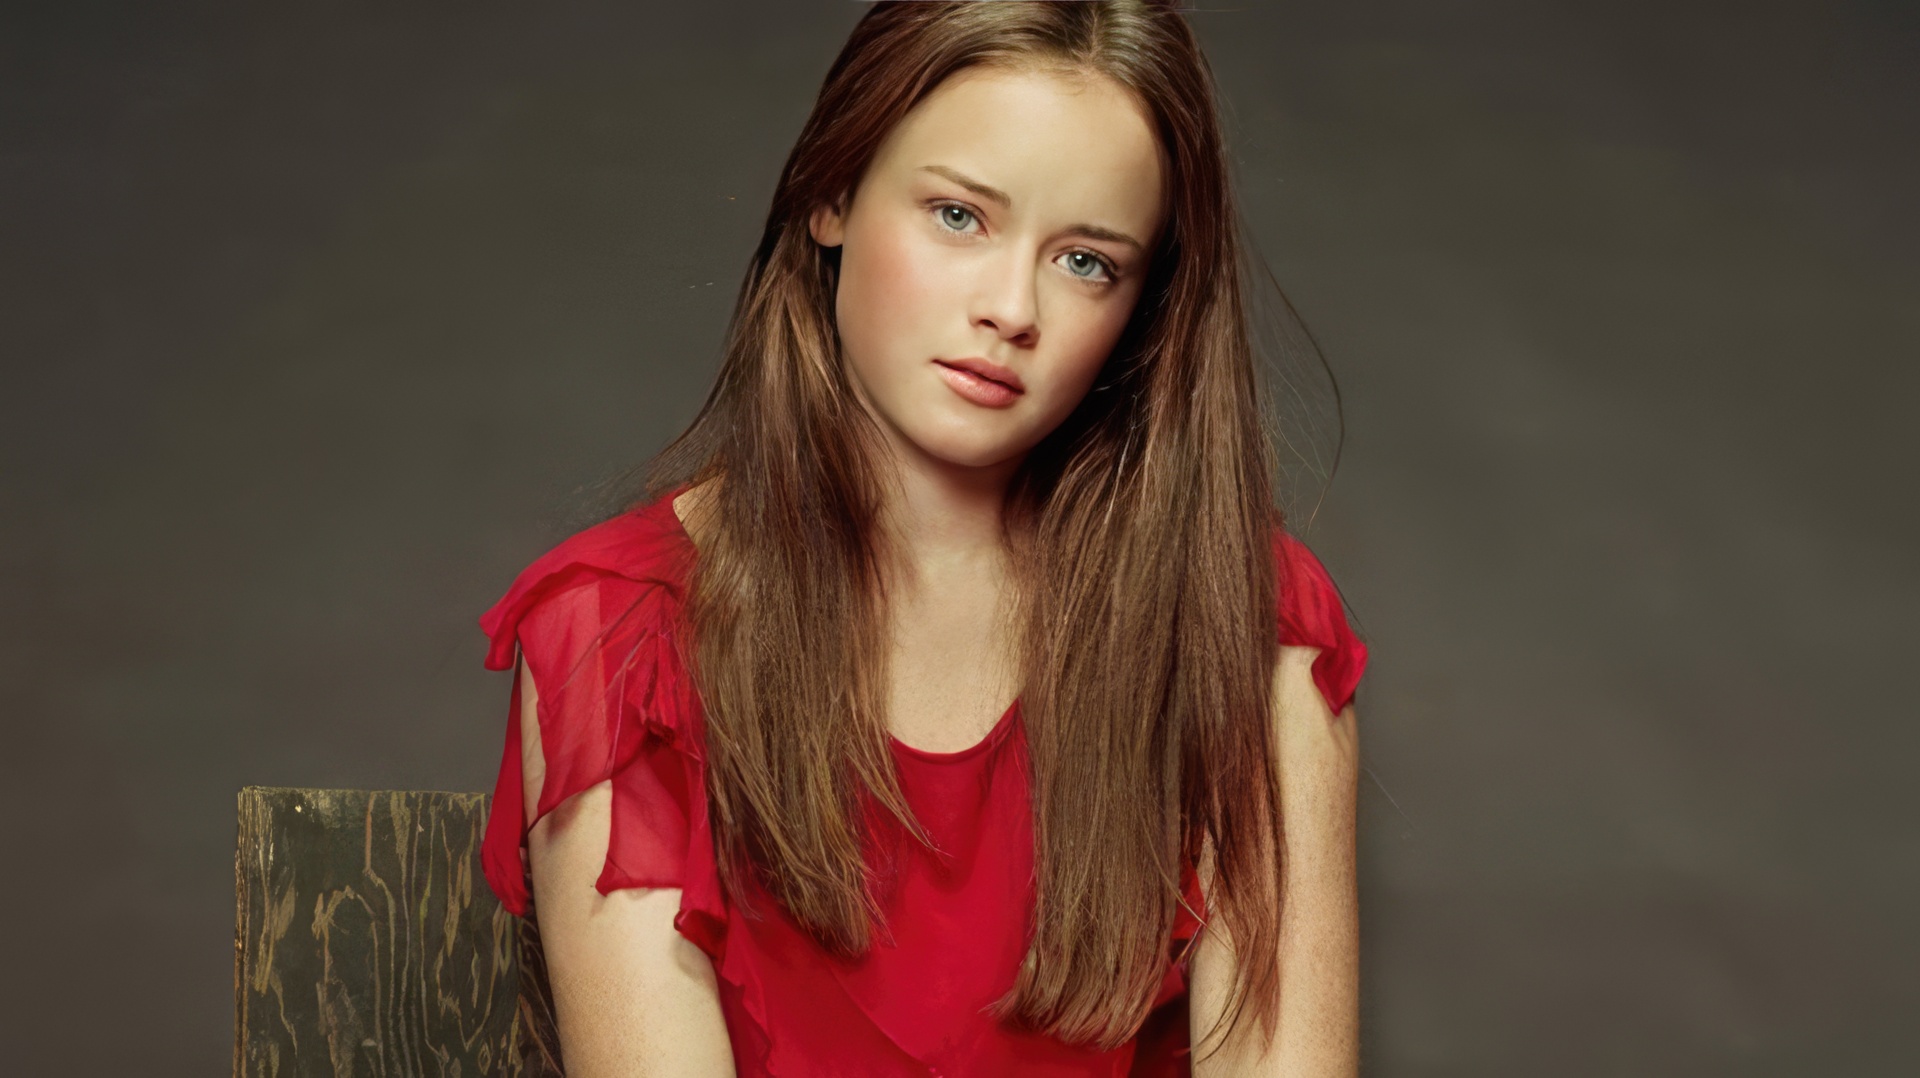 Alexis Bledel at the Beginning of her Career